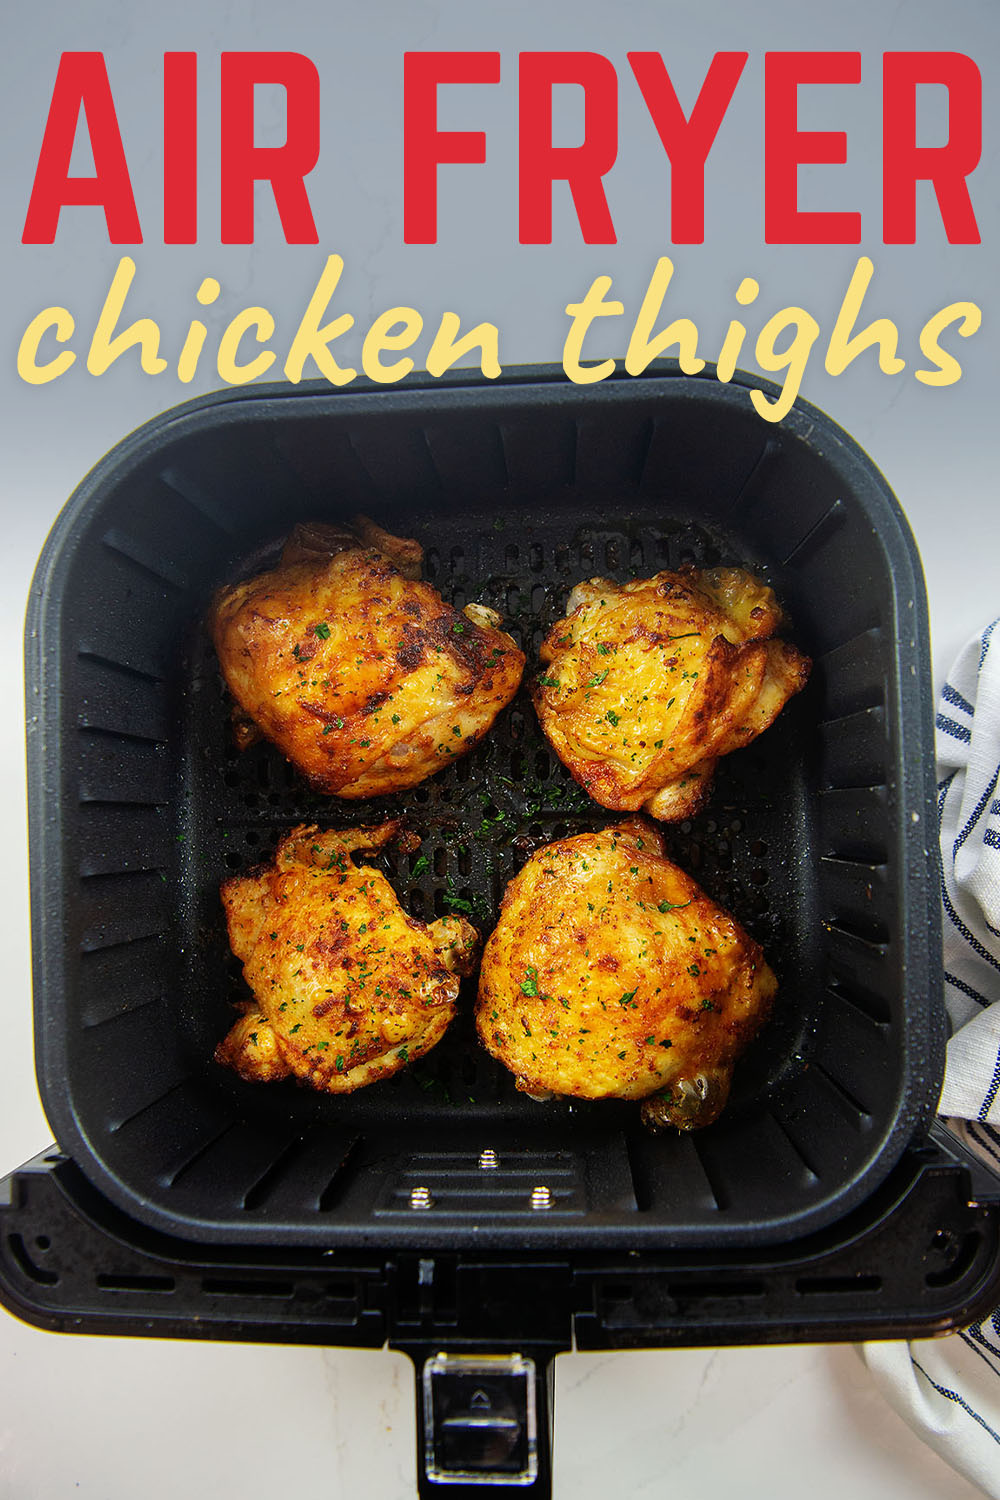 Air fried chicken thighs are the most tender and juiciest cuts of meat and the air fryer makes the skin have a great texture that is full of flavor!